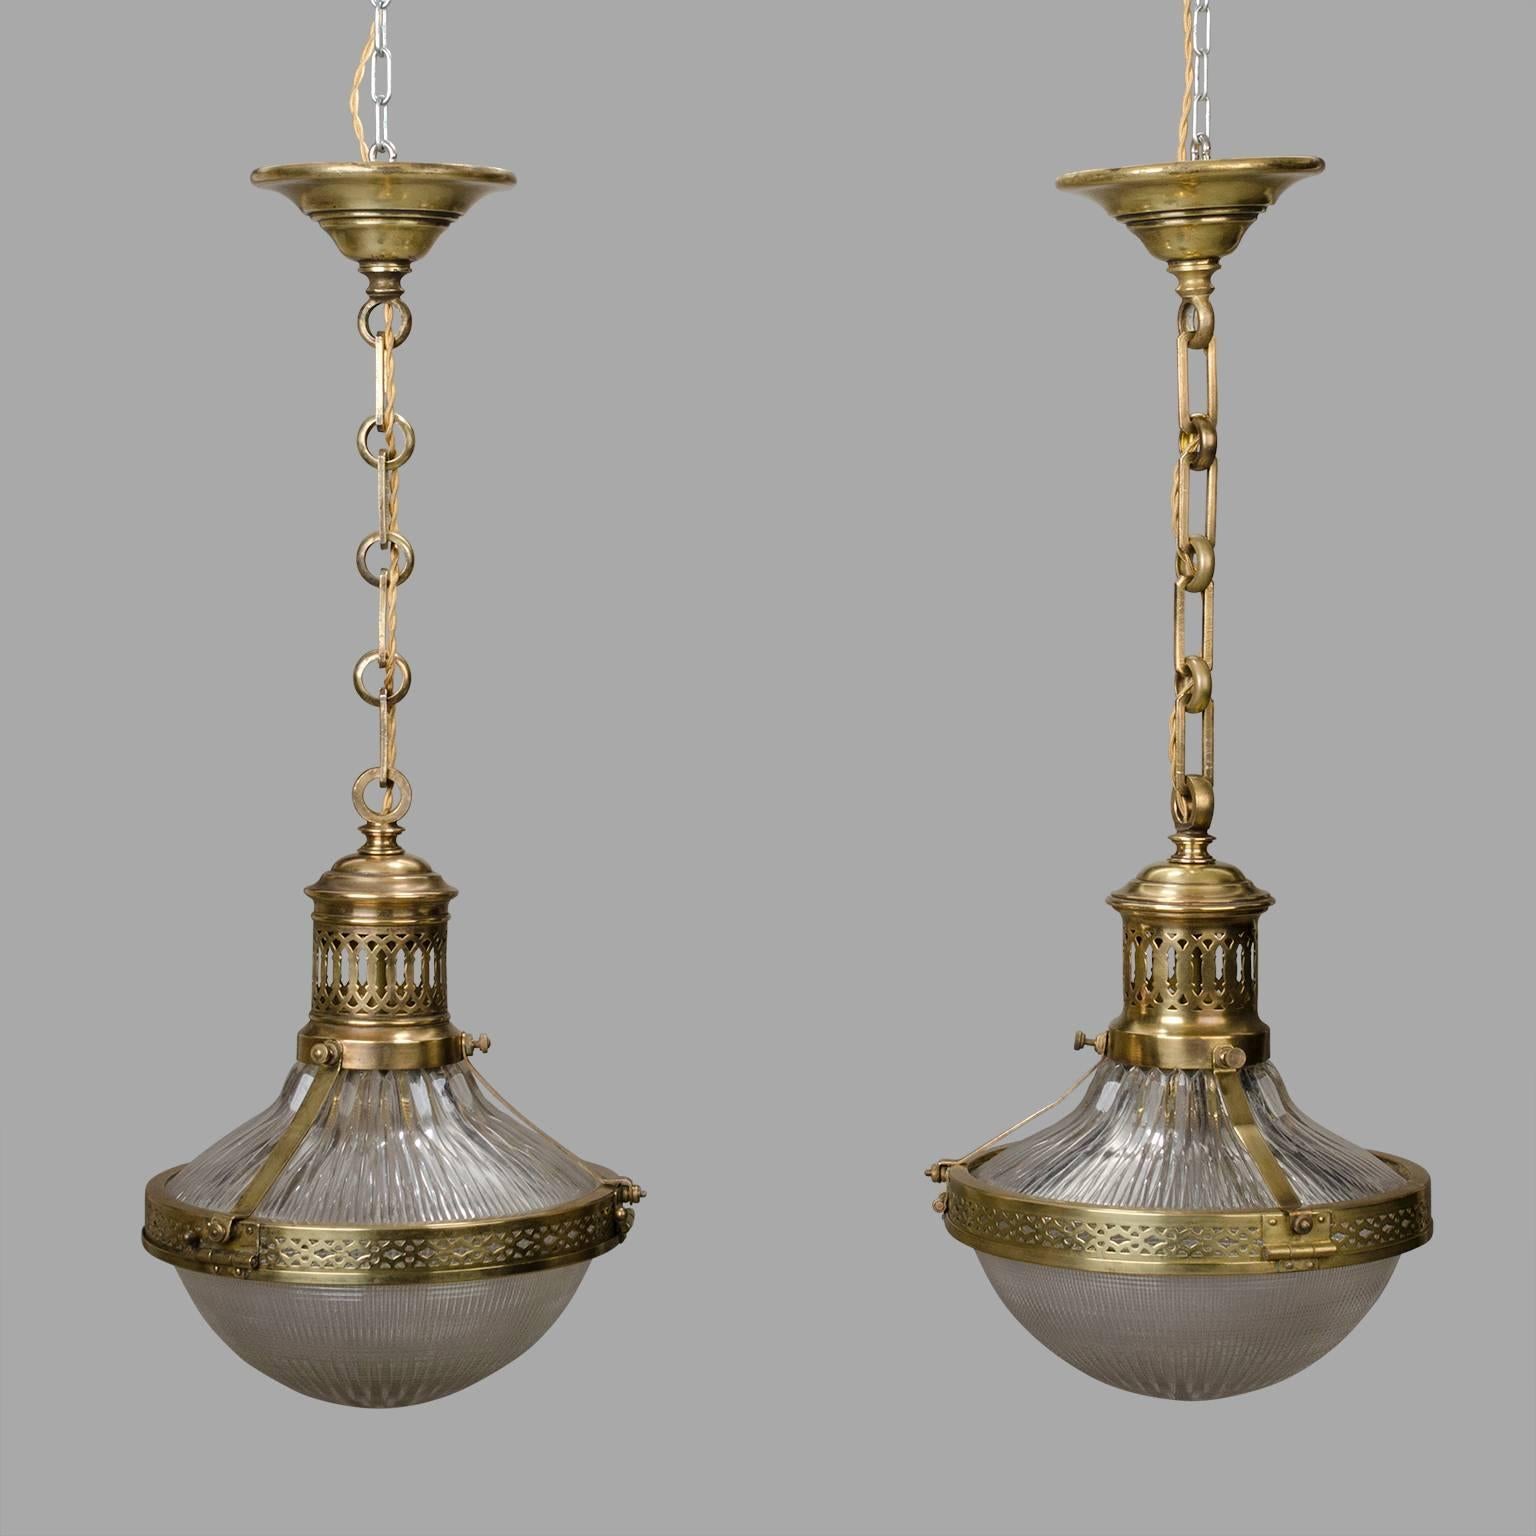 These two suspension are quasi identical and form an harmonious pair excepted a slight difference on the design of the upper claw.

The collar glass of one of the suspension is broken but this is invisible once the suspension is mounted.